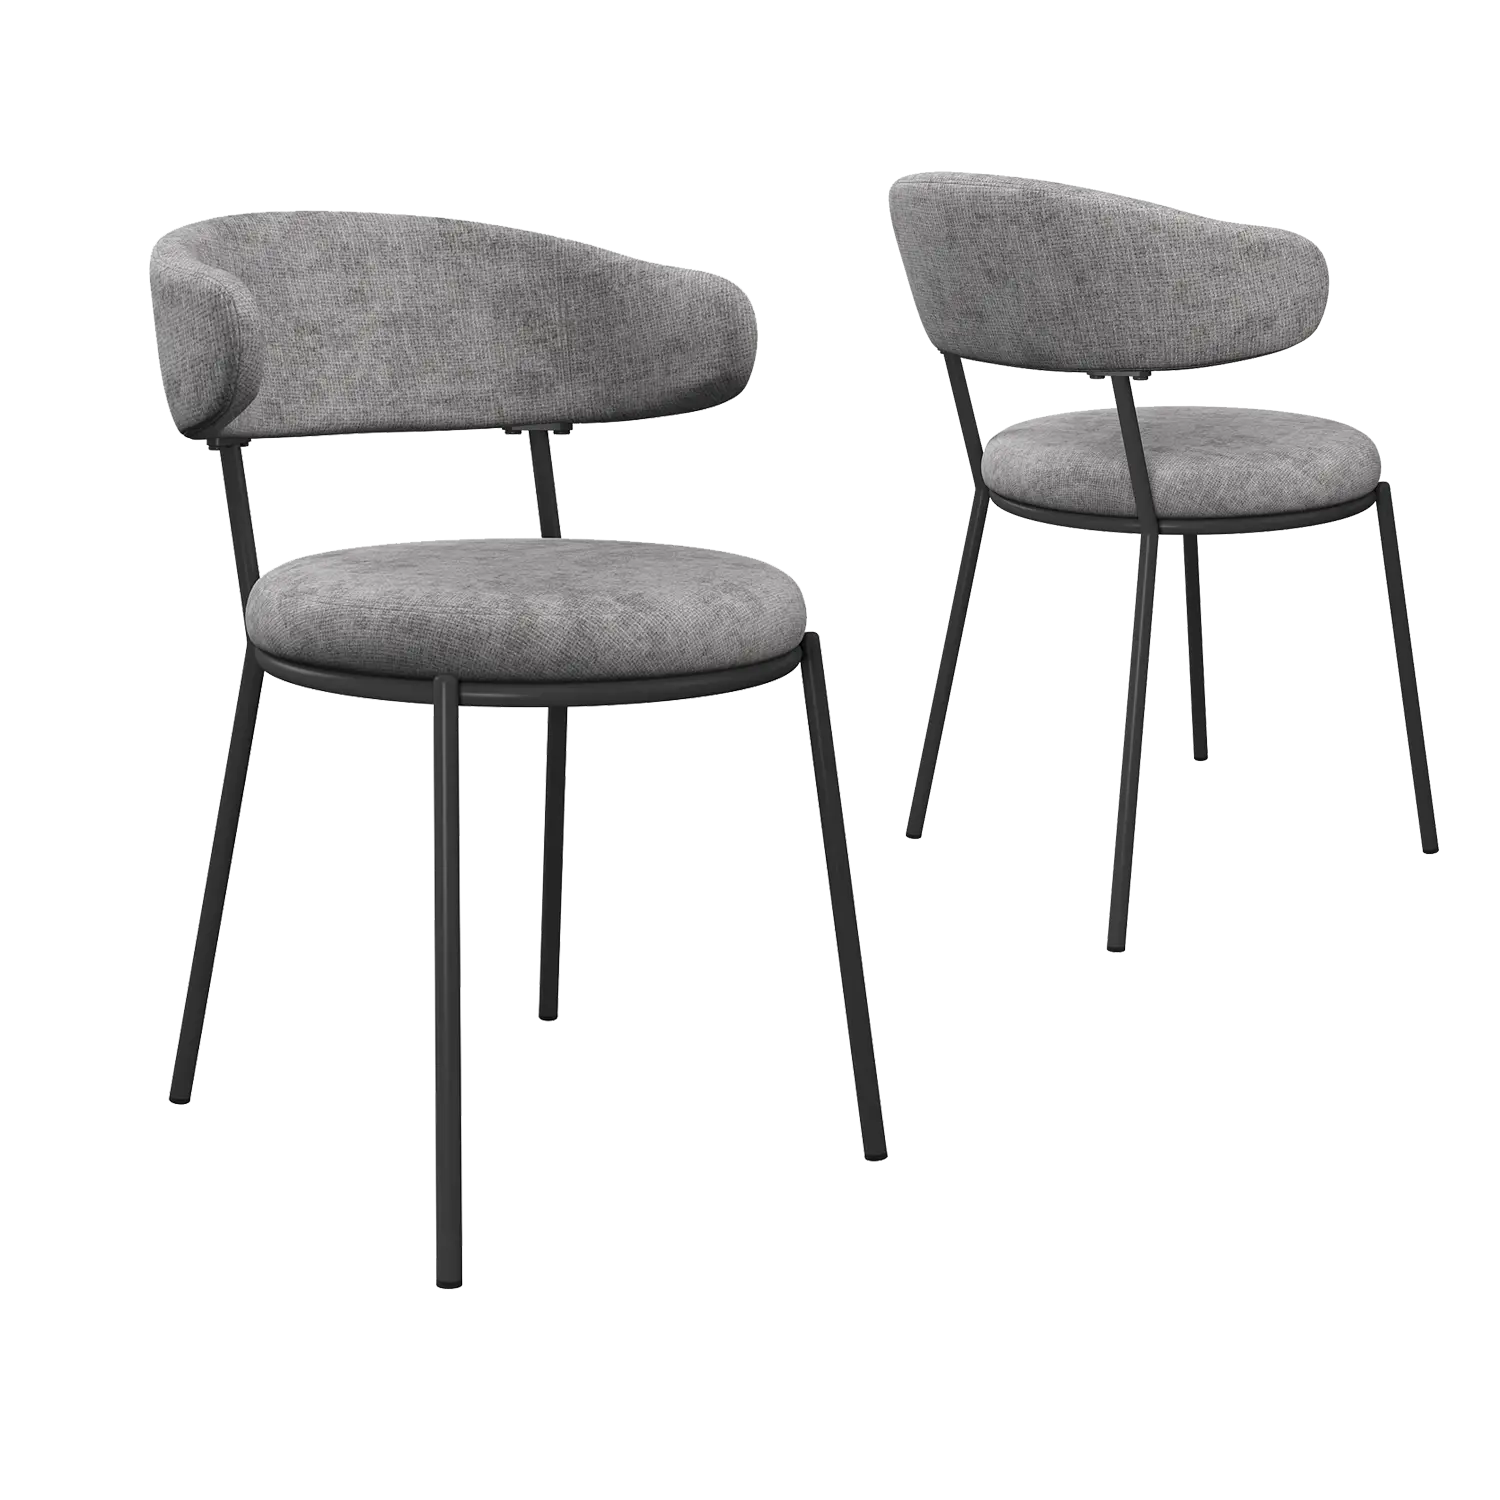 Cartier 80cm Square Gloss Grey Ceramic Dining Table with 2 Ria Dining Chairs